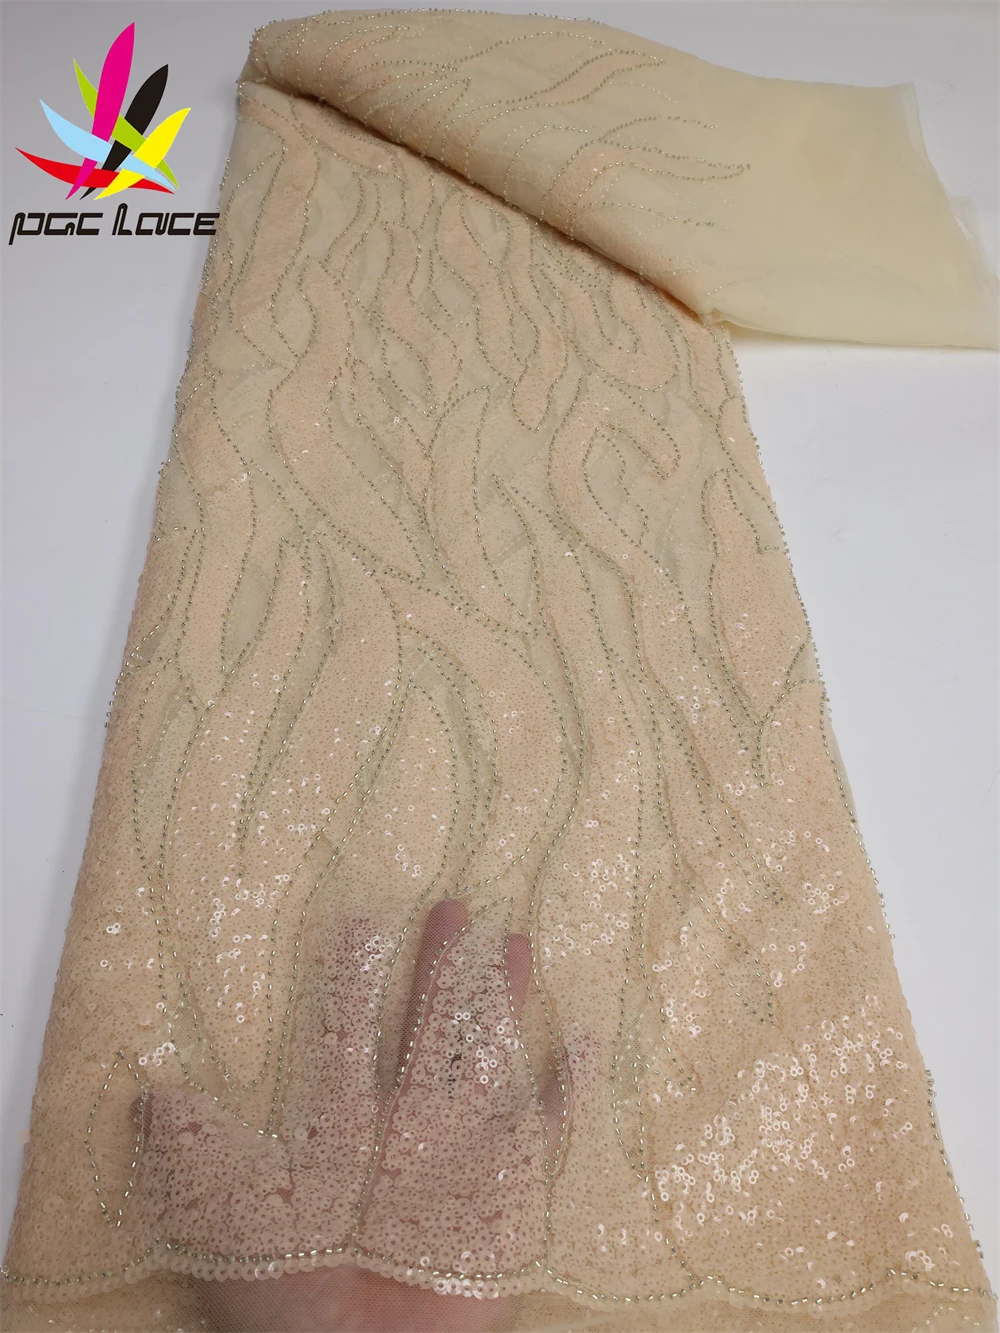 PGC Gold African Groom Lace Fabric 2023 High Quality French Mesh Lace Fabric Sequins Nigerian Lace Fabrics For Wedding pgc nigerian lace fabrics gold african lace fabric 2021 high quality lace with sequins french lace fabric for sewing ya4602b 2